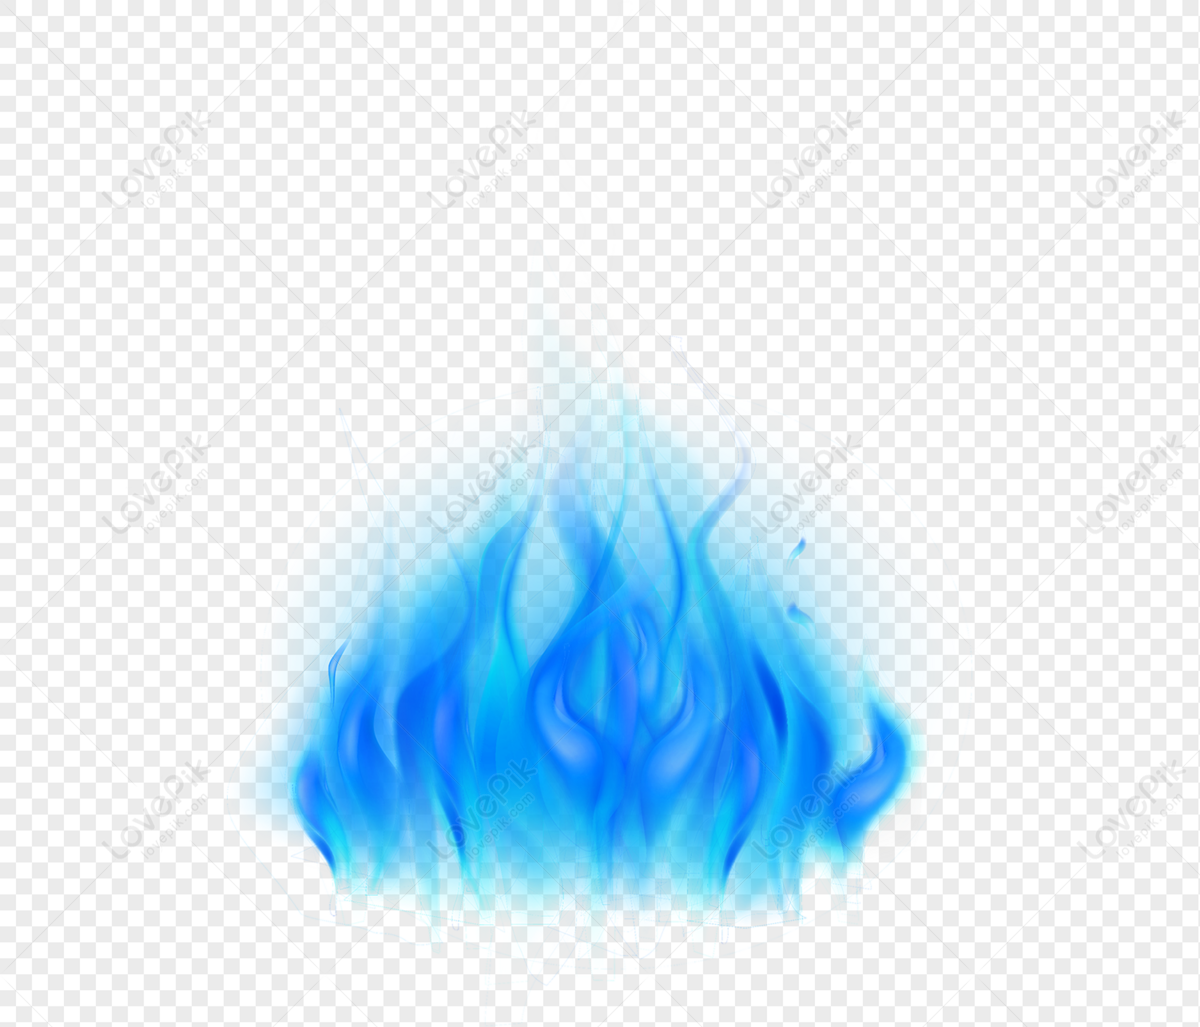 Blue Gradient Magic Flame PNG Transparent And Clipart Image For Free  Download - Lovepik | 401517086